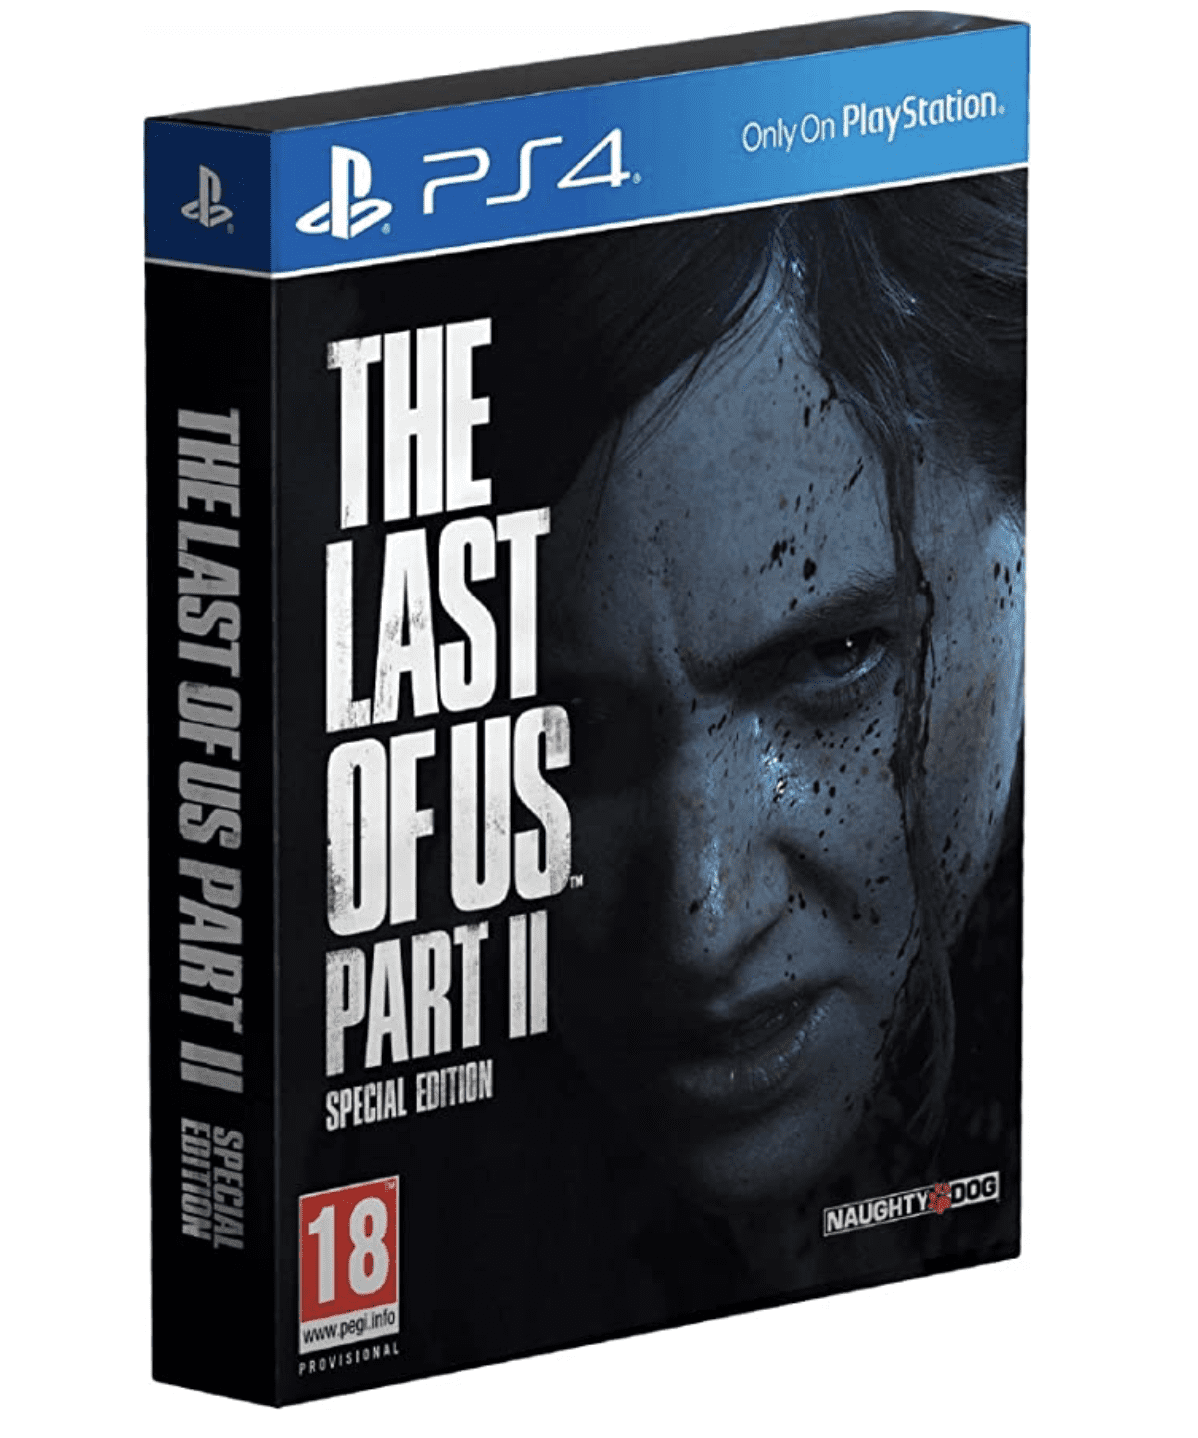 The Last of Us Part 2 Special Edition Steelbook PS4